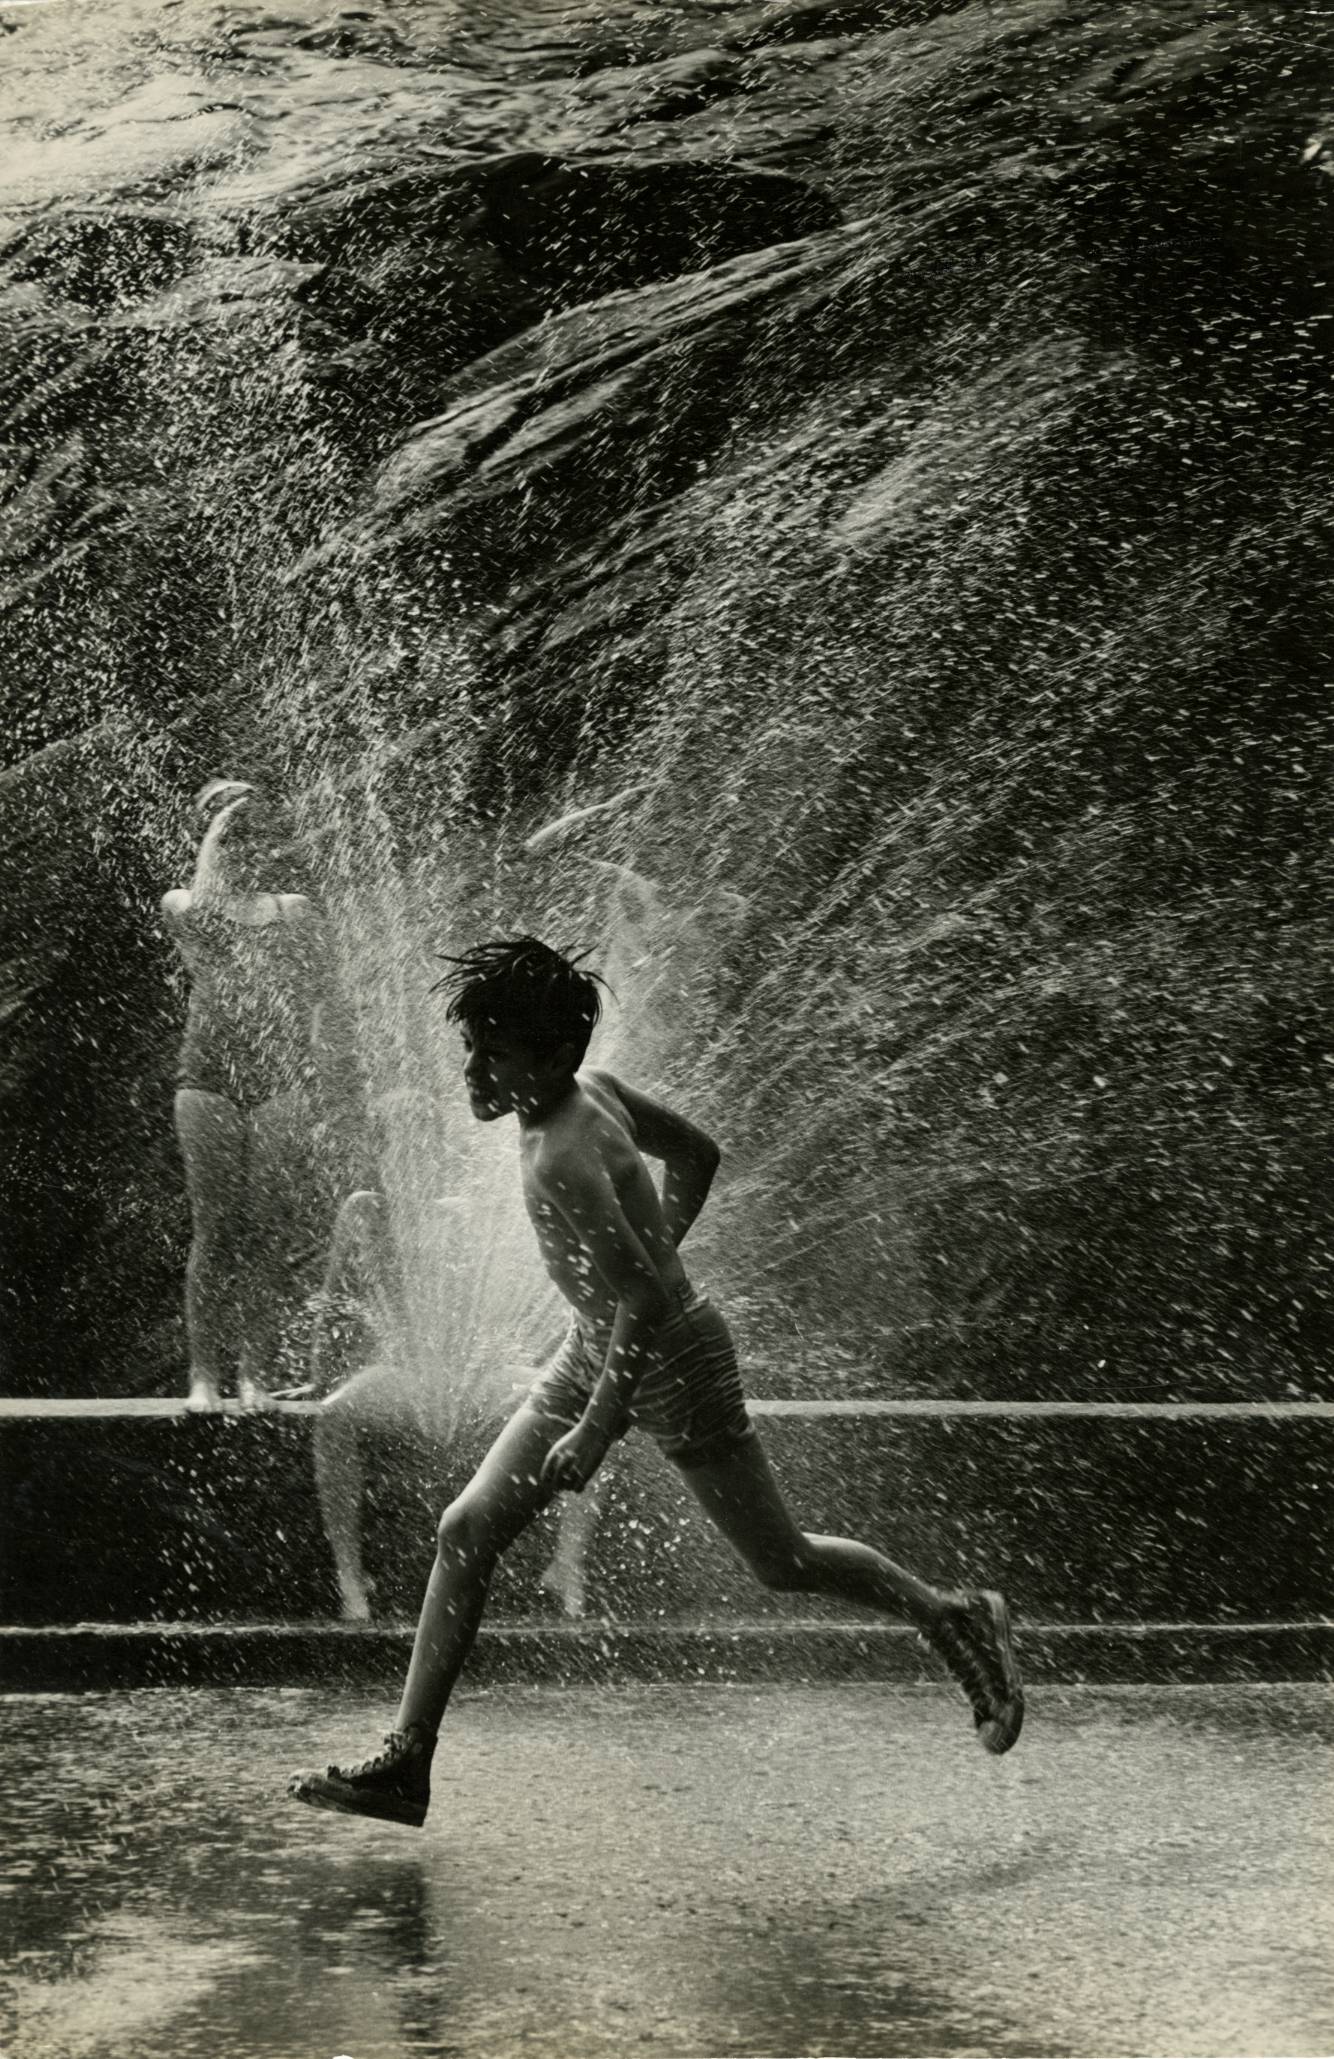 a boy in a bathing suit running through a spray of water